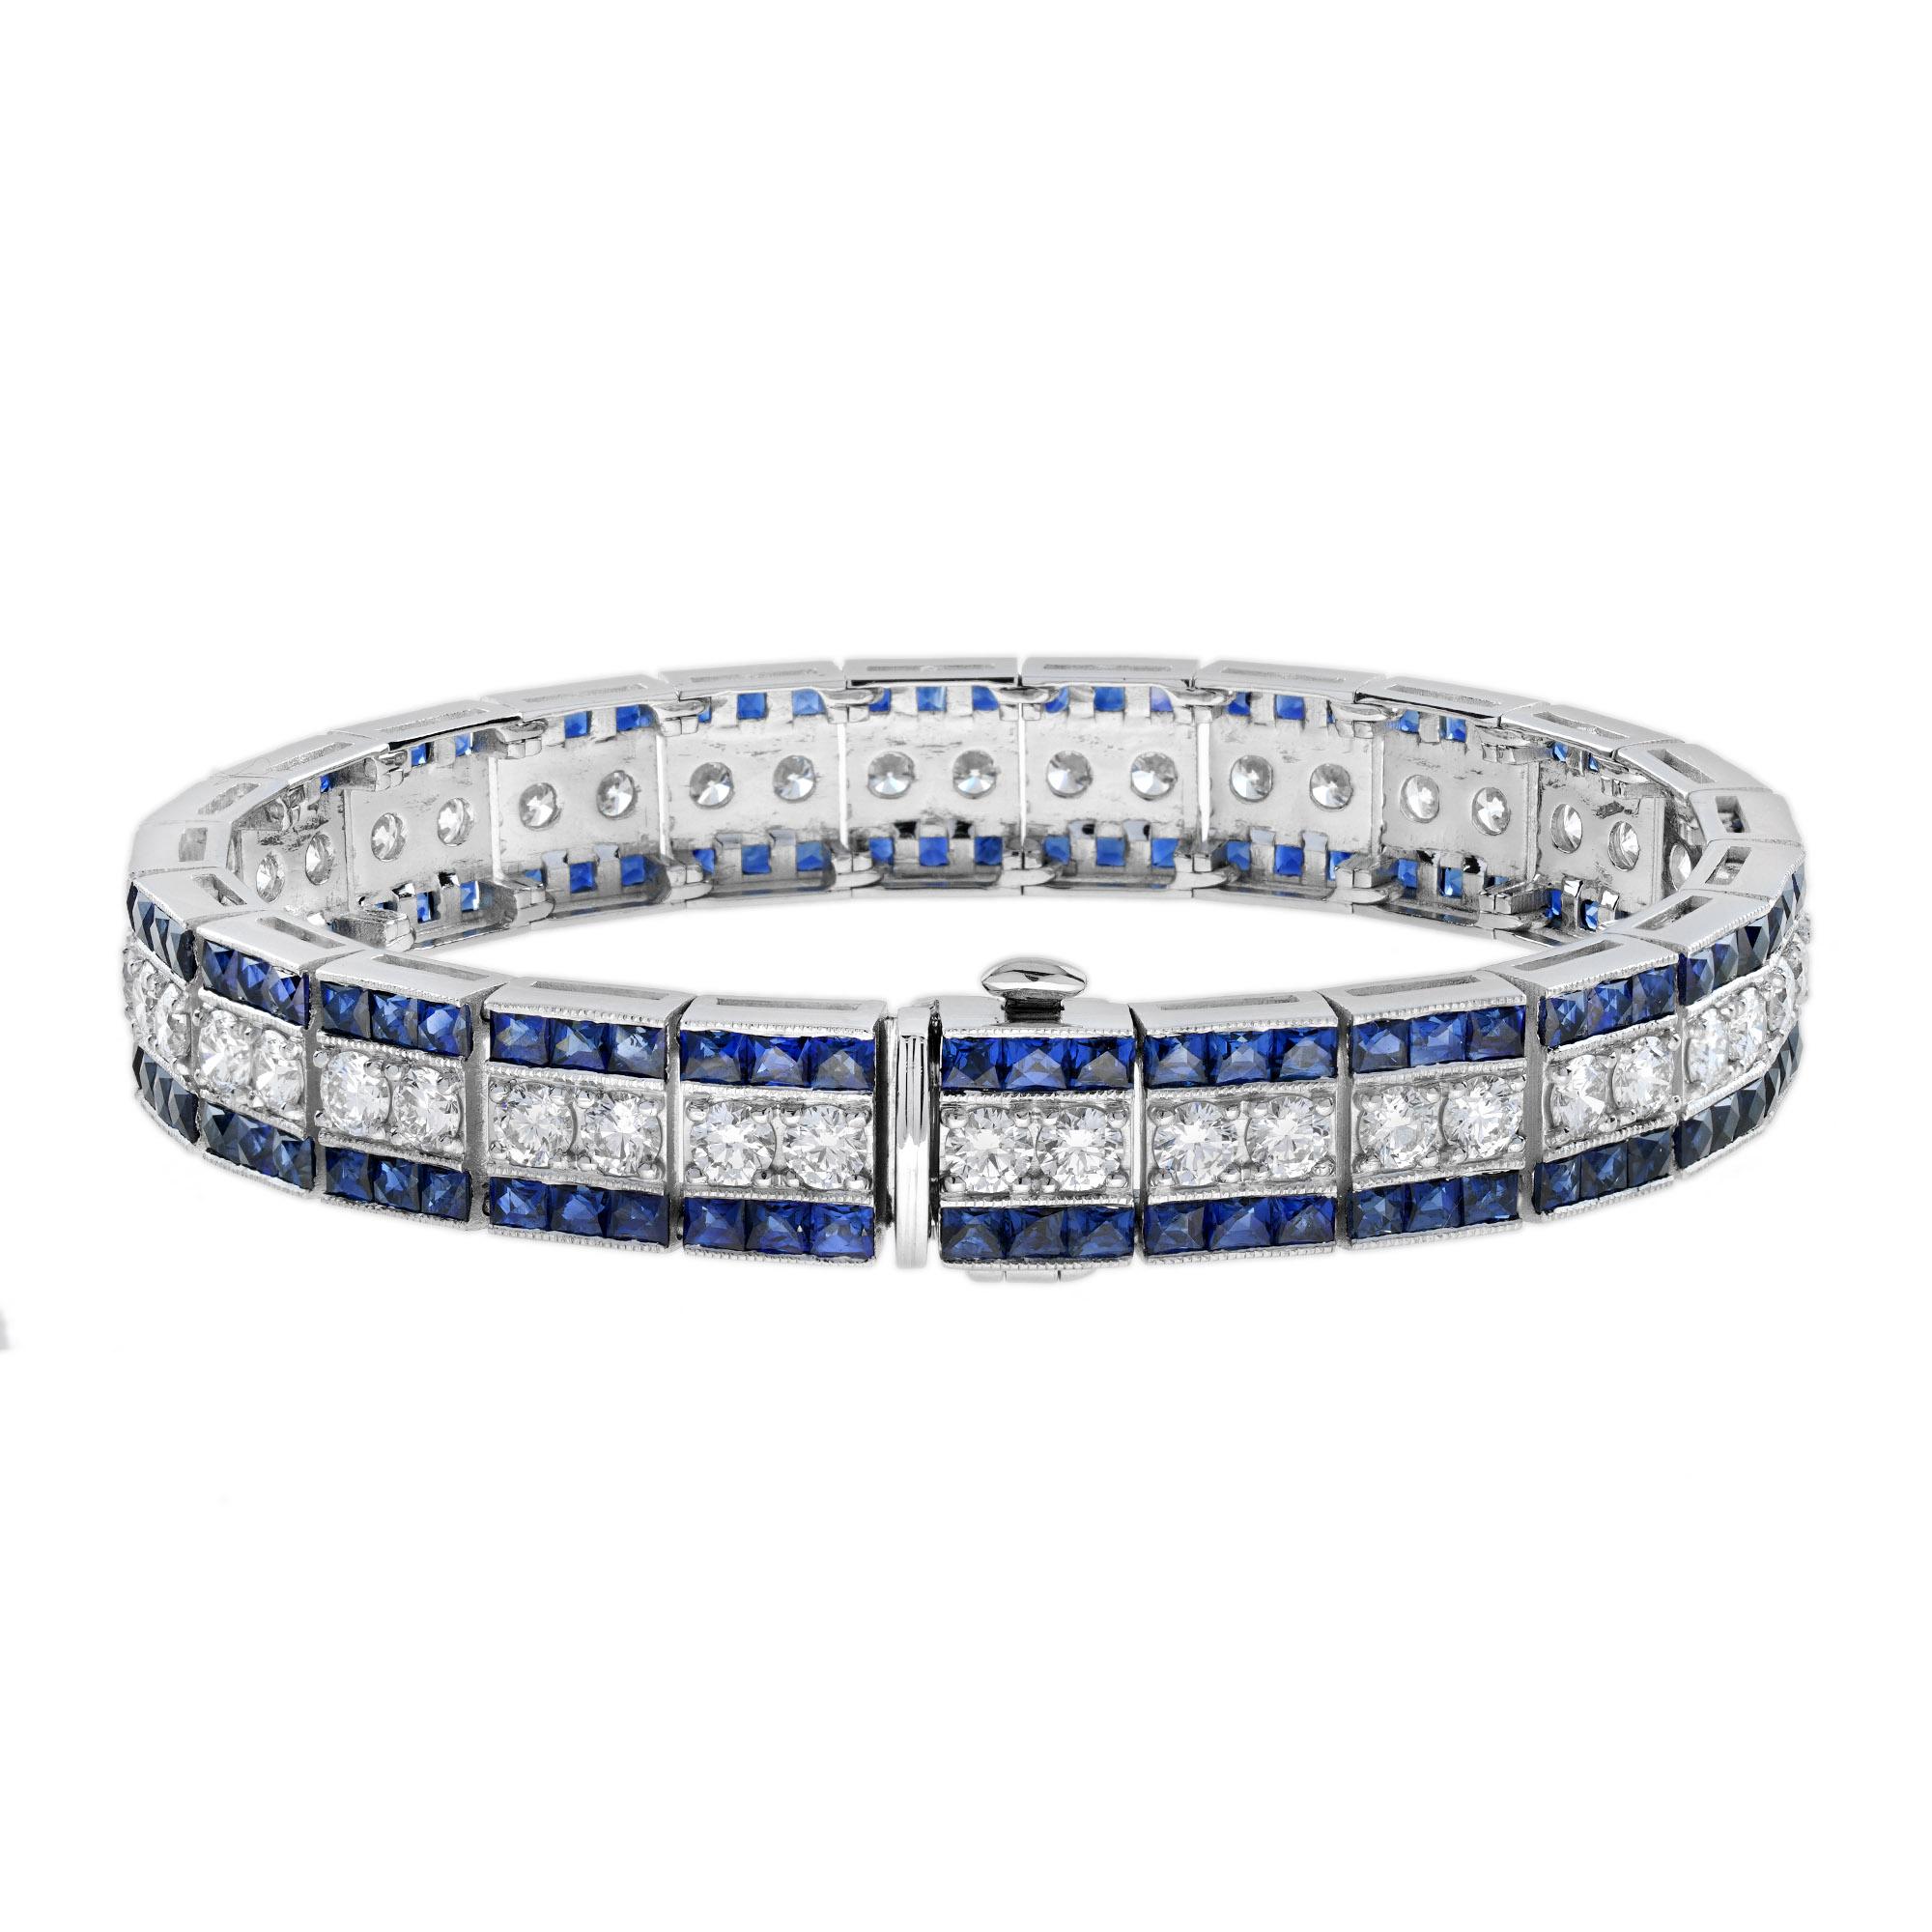 6.7 Ct. Diamond and Blue Sapphire Art Deco Style Bracelet in Platinum950 In New Condition For Sale In Bangkok, TH